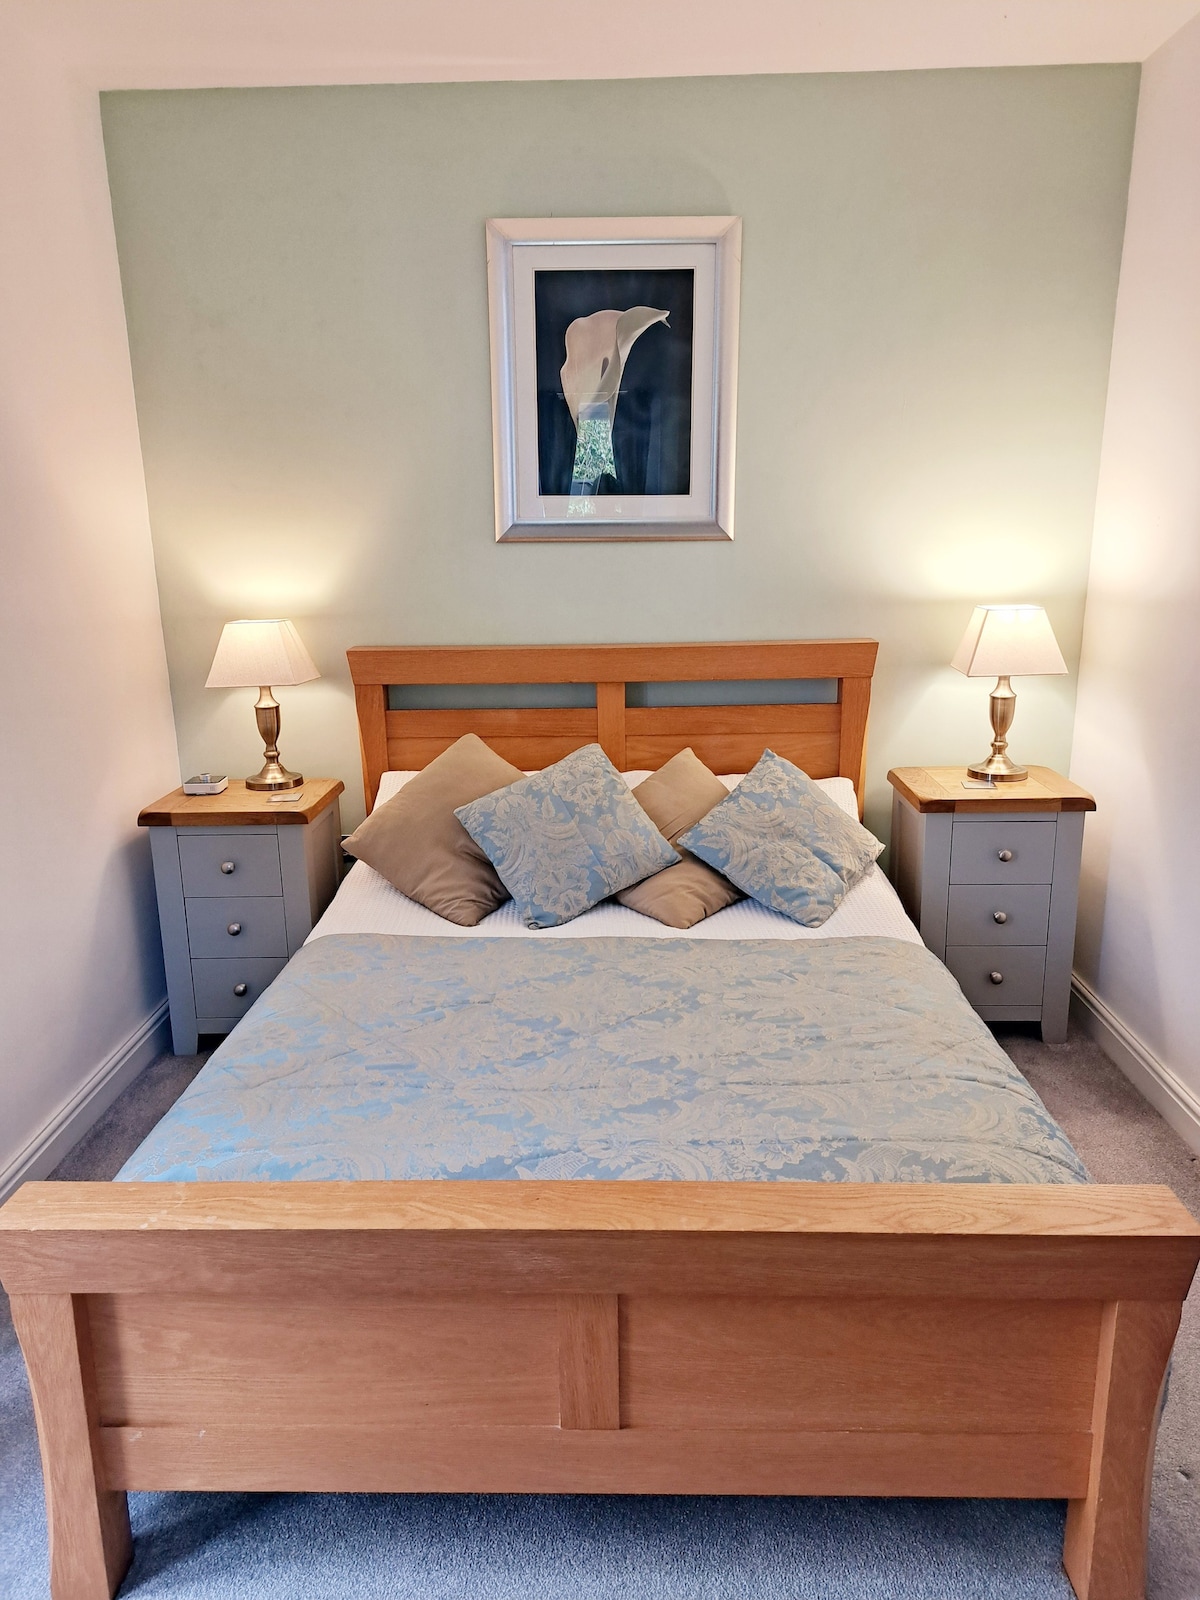 Cefn Llwyn
Luxury Guest Room with Private Entrance